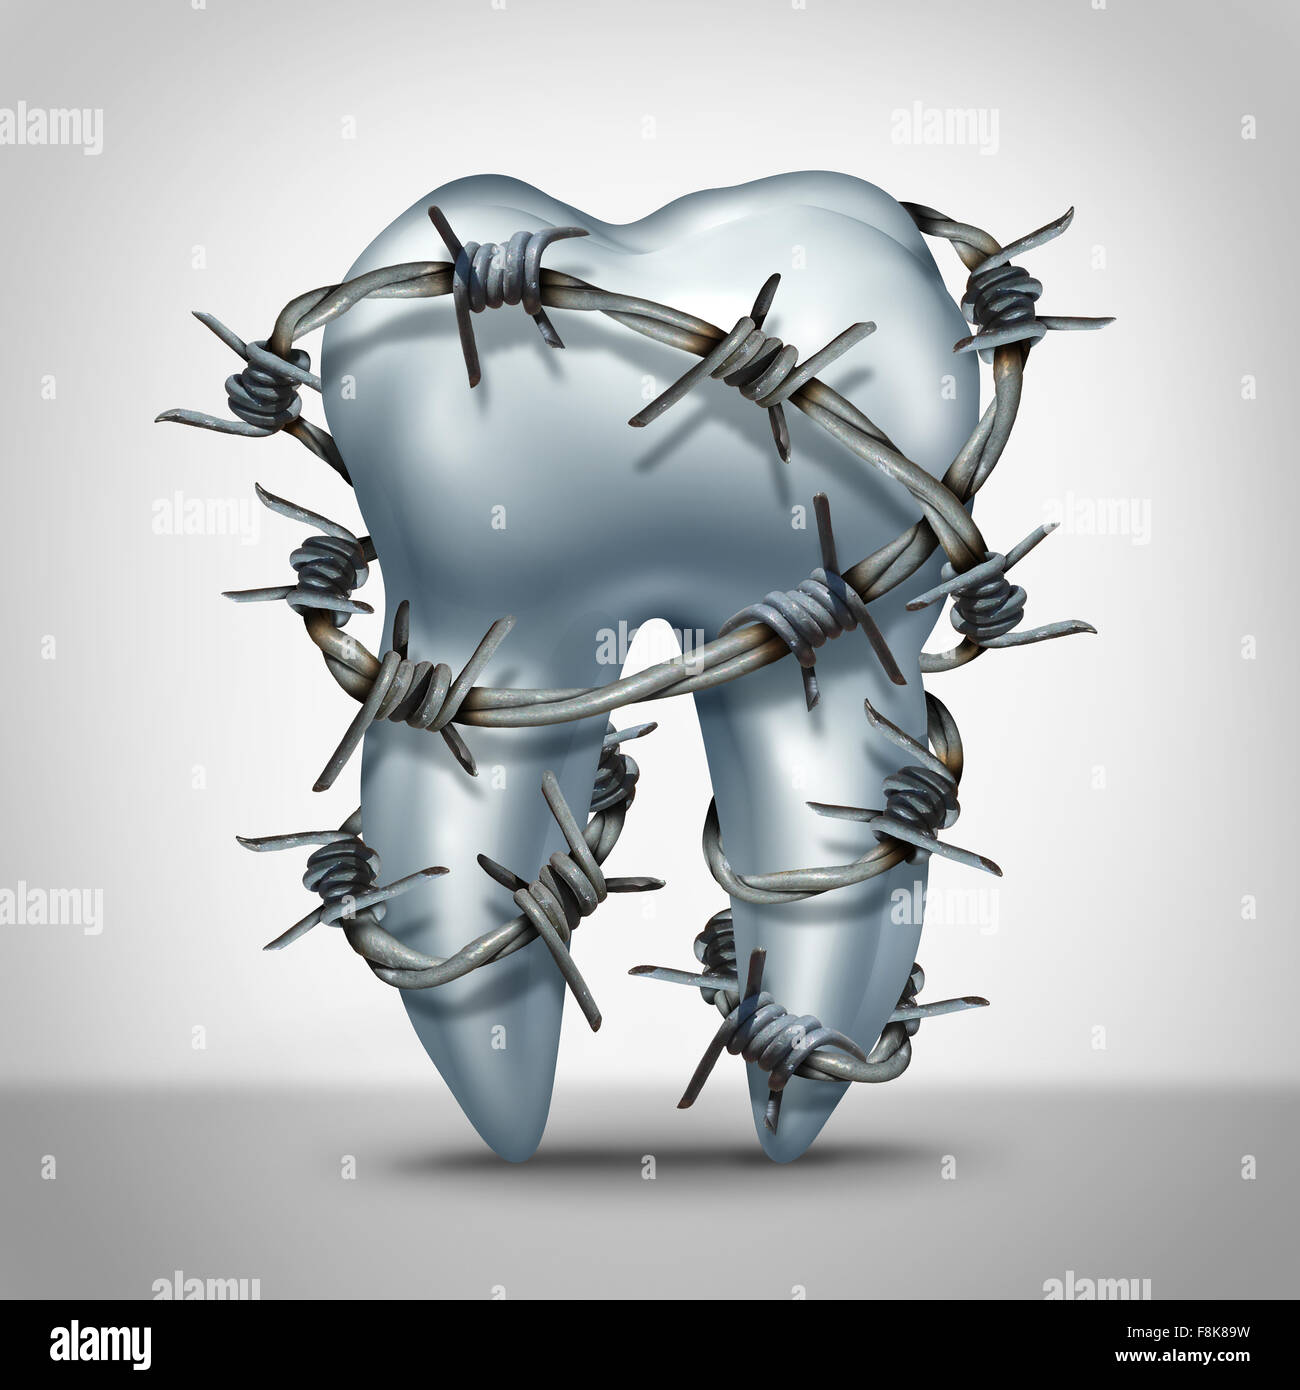 Tooth pain dental toothache concept as a human molar symbol with sharp barbed wire as a dentist metaphor for sensitive teeth or Stock Photo